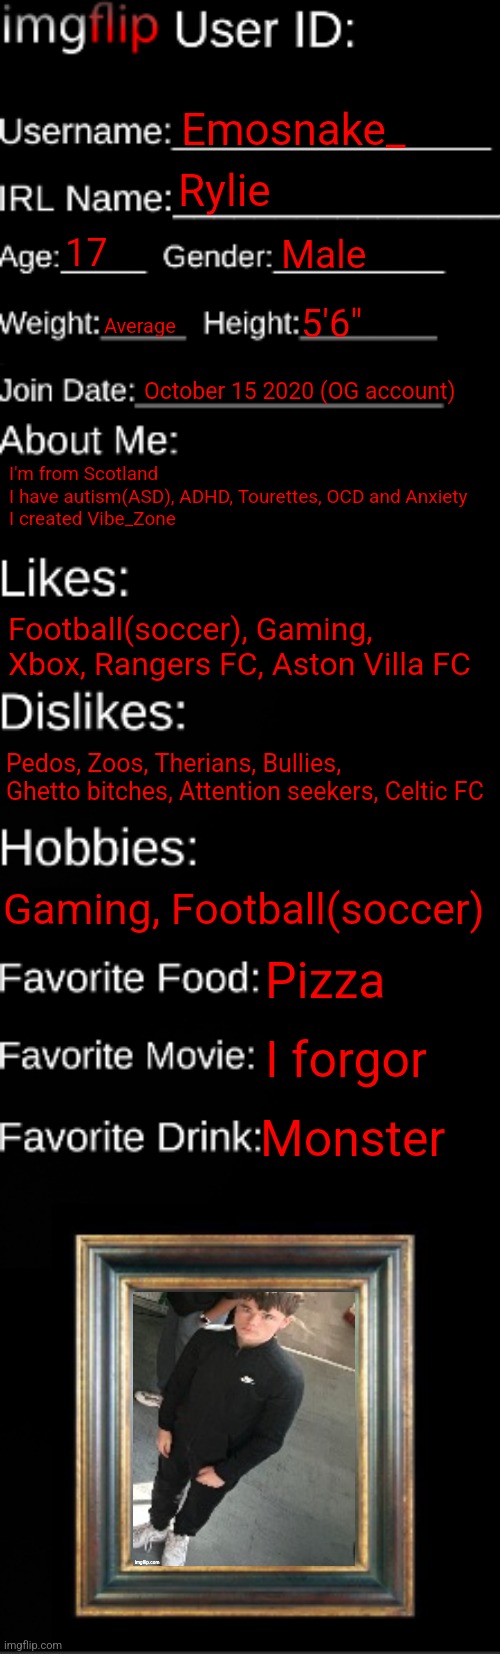 imgflip ID Card | Emosnake_; Rylie; 17; Male; Average; 5'6"; October 15 2020 (OG account); I'm from Scotland
I have autism(ASD), ADHD, Tourettes, OCD and Anxiety
I created Vibe_Zone; Football(soccer), Gaming, Xbox, Rangers FC, Aston Villa FC; Pedos, Zoos, Therians, Bullies, Ghetto bitches, Attention seekers, Celtic FC; Gaming, Football(soccer); Pizza; I forgor; Monster | image tagged in imgflip id card | made w/ Imgflip meme maker